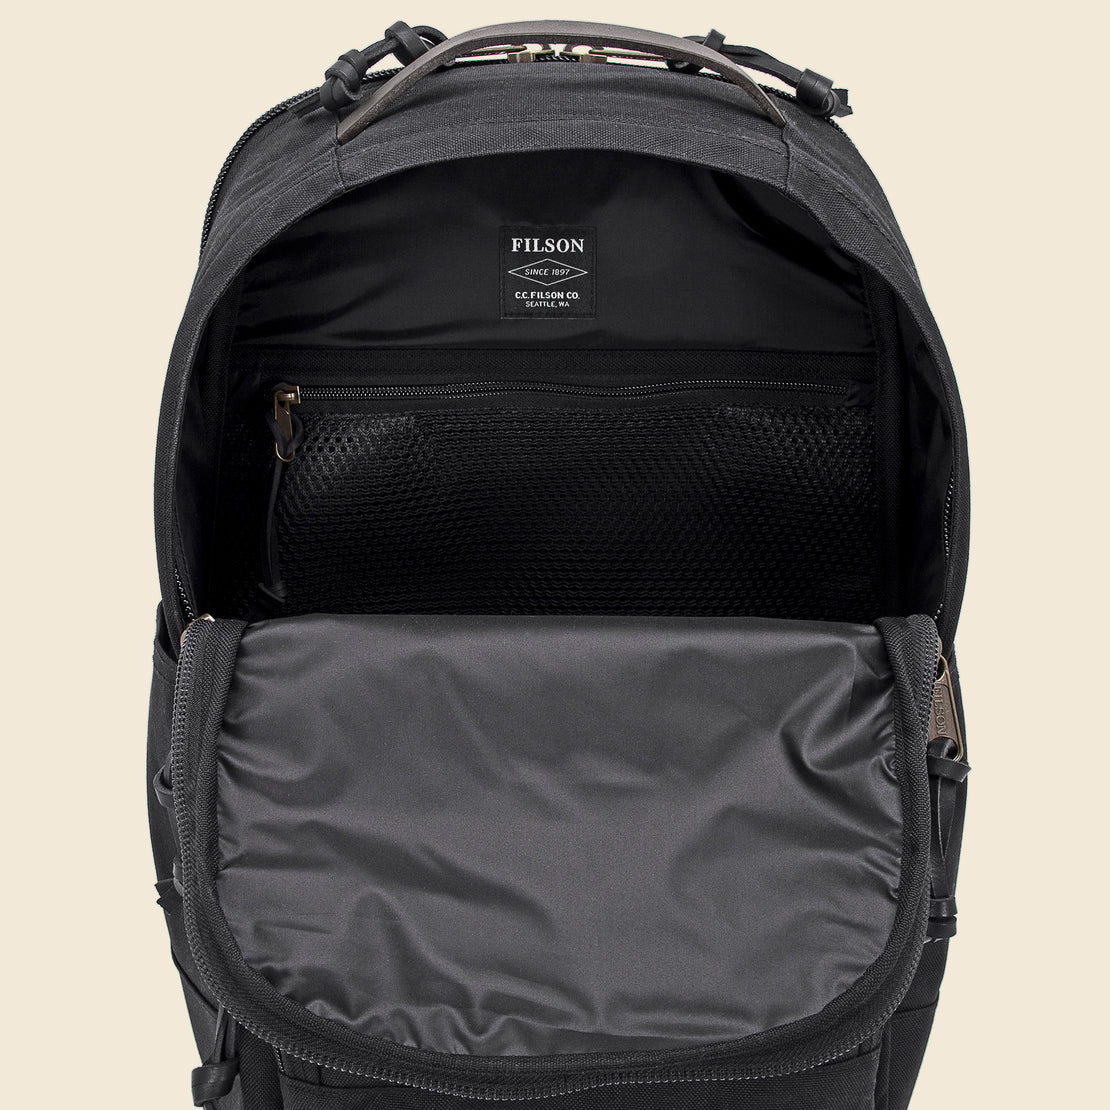 Dryden Backpack - Dark Navy - Filson - STAG Provisions - Accessories - Bags / Luggage